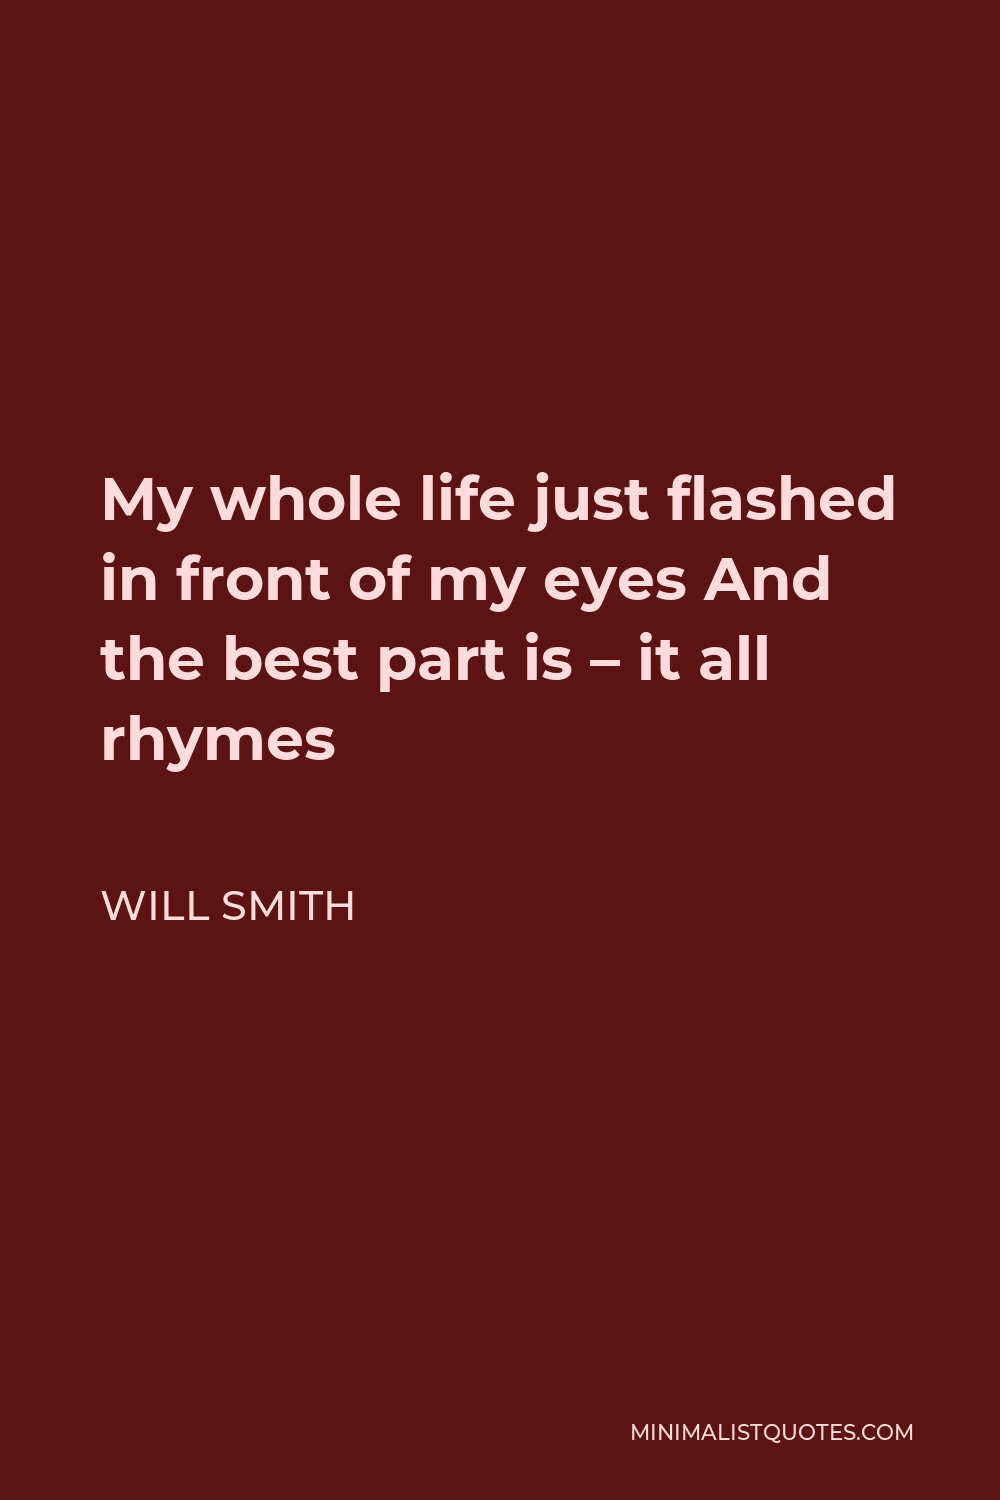 Will Smith Quote - My whole life just flashed in front of my eyes And the best part is – it all rhymes